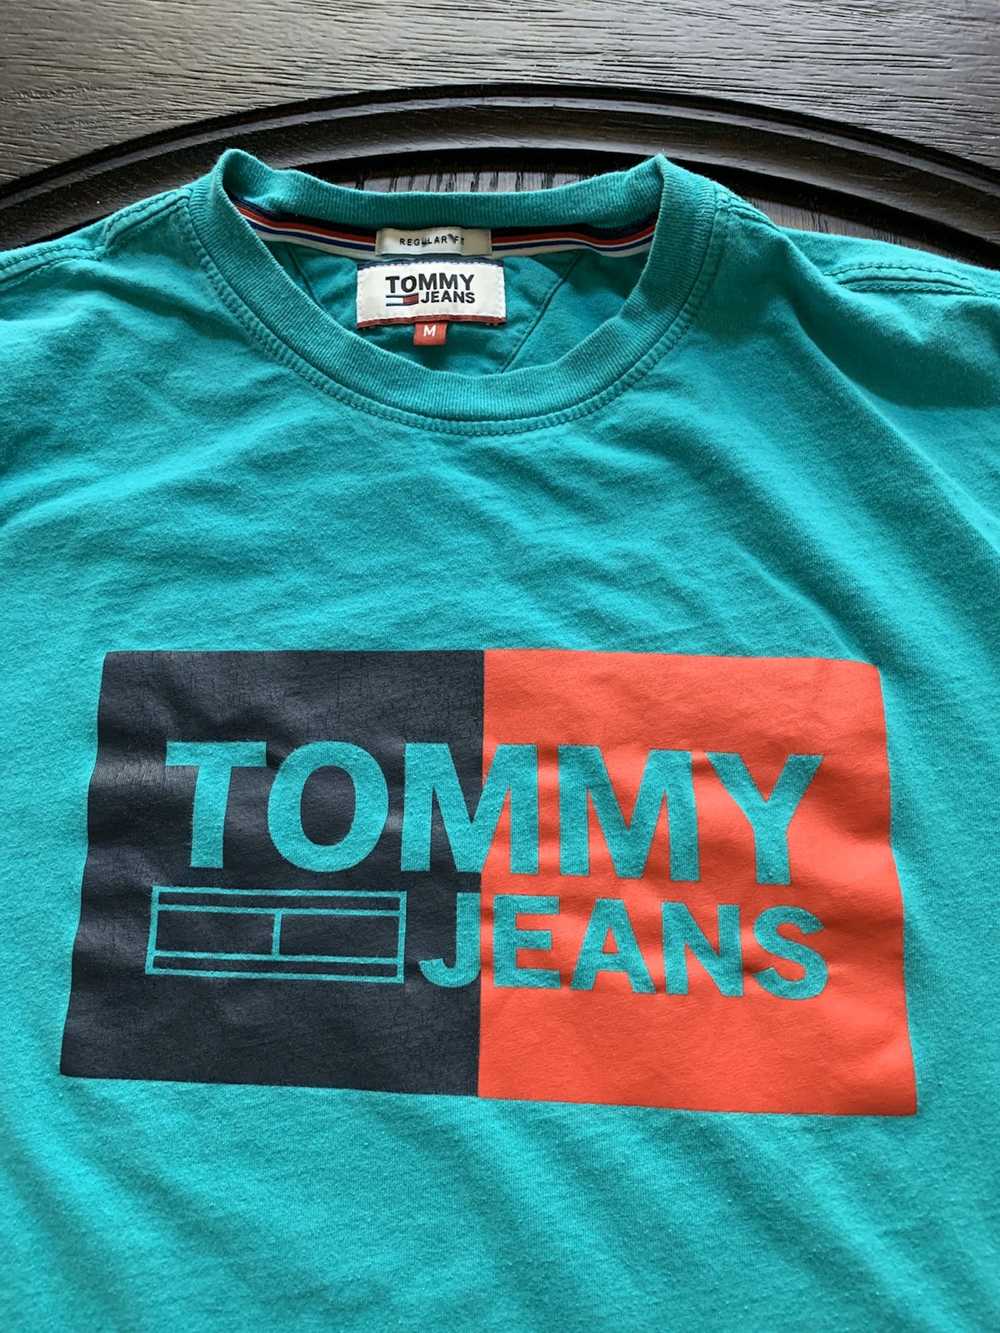 Tommy Jeans Tommy jeans t shirt - image 2